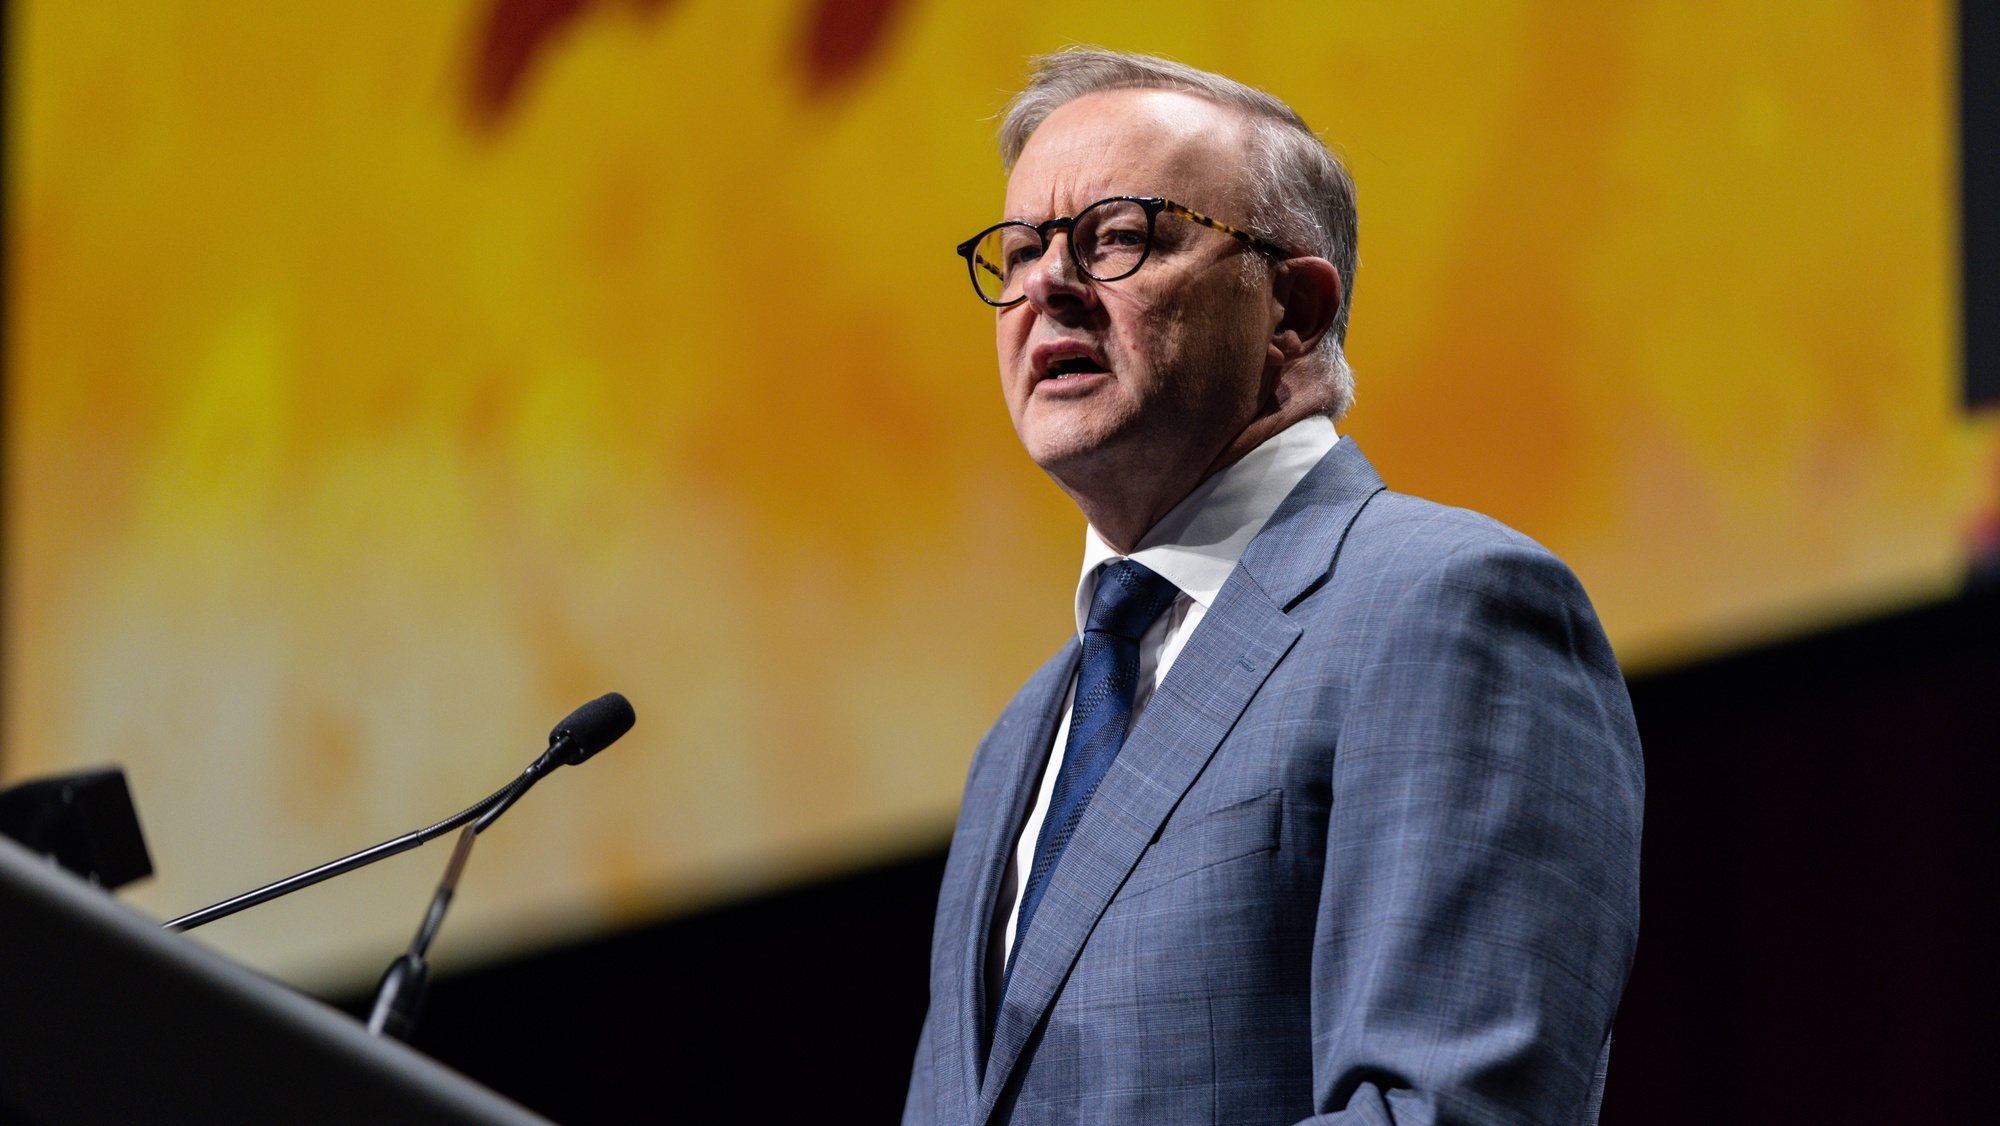 epa10316981 Australian Prime Minister Anthony Albanese speaks during the International Trade Union Confederation World Congress at the Melbourne Convention and Exhibition Centre in Melbourne, Australia, 21 November 2022.  EPA/DIEGO FEDELE   AUSTRALIA AND NEW ZEALAND OUT